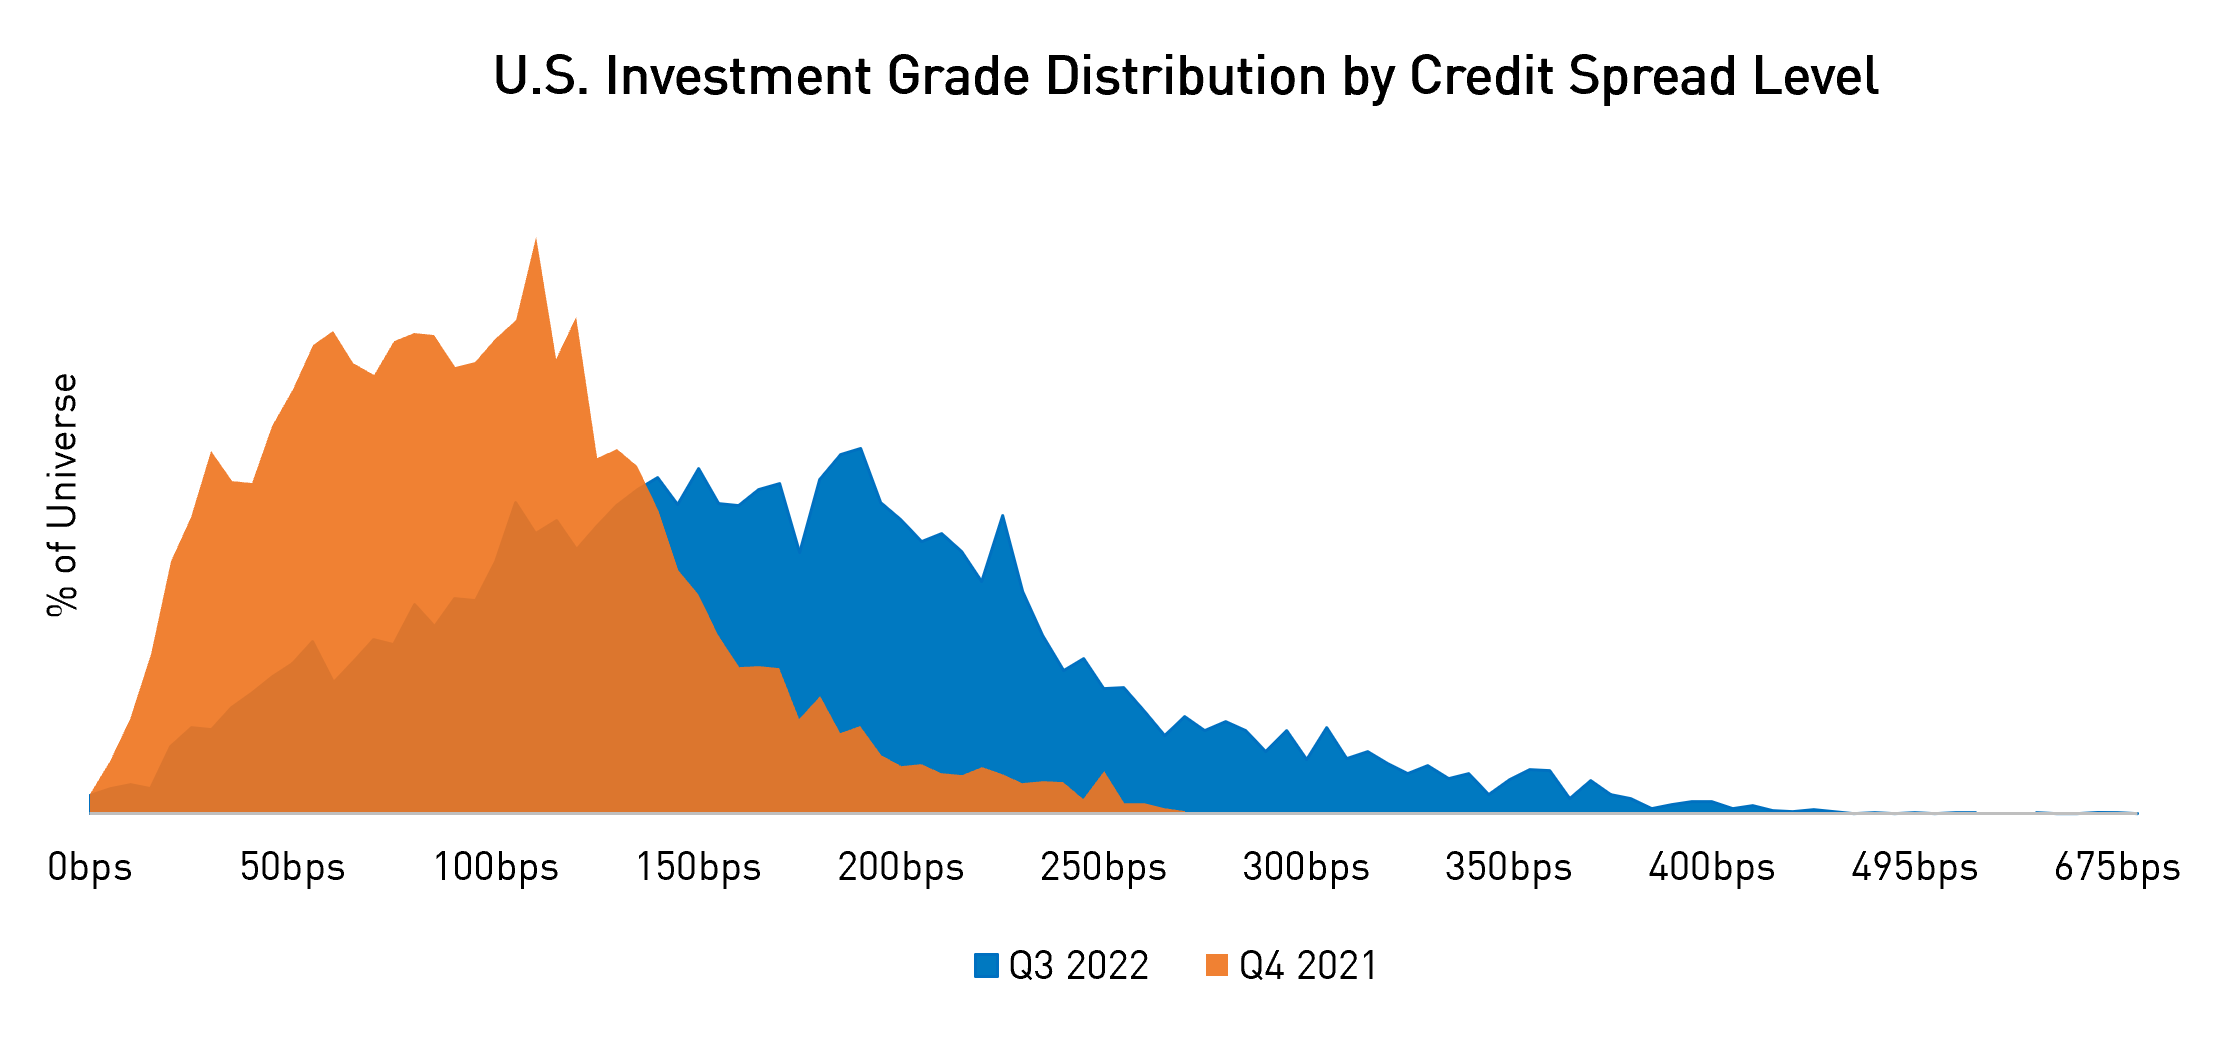 Chart showing Q3 2022 and Q4 2021 credit spread level and percentage of universe